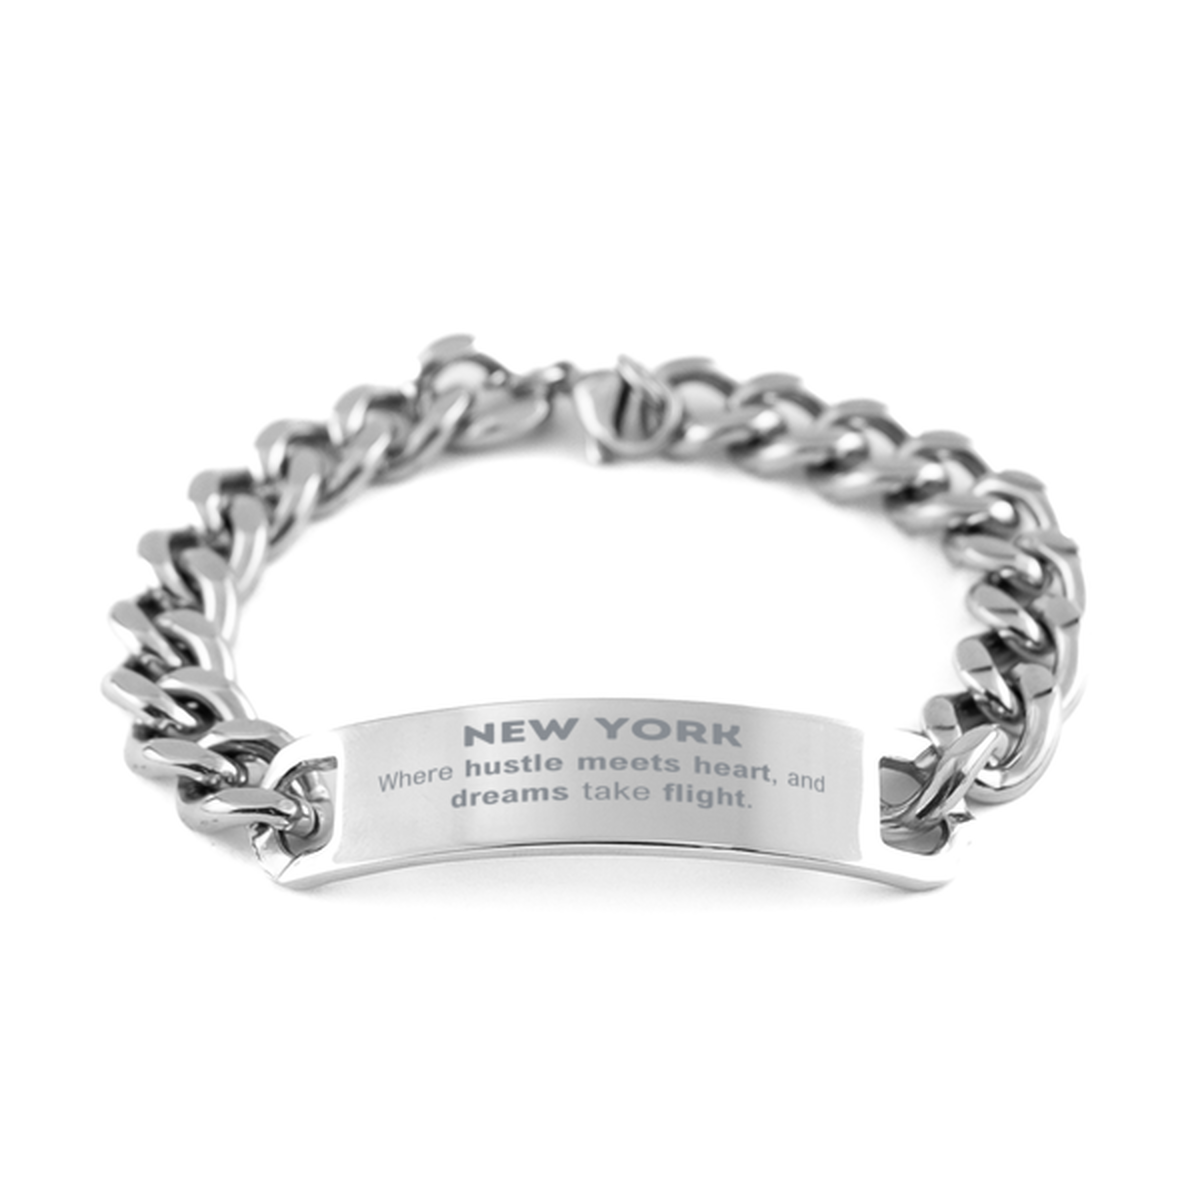 New York: Where hustle meets heart, and dreams take flight, New York Gifts, Proud New York Christmas Birthday New York Cuban Chain Stainless Steel Bracelet, New York State People, Men, Women, Friends